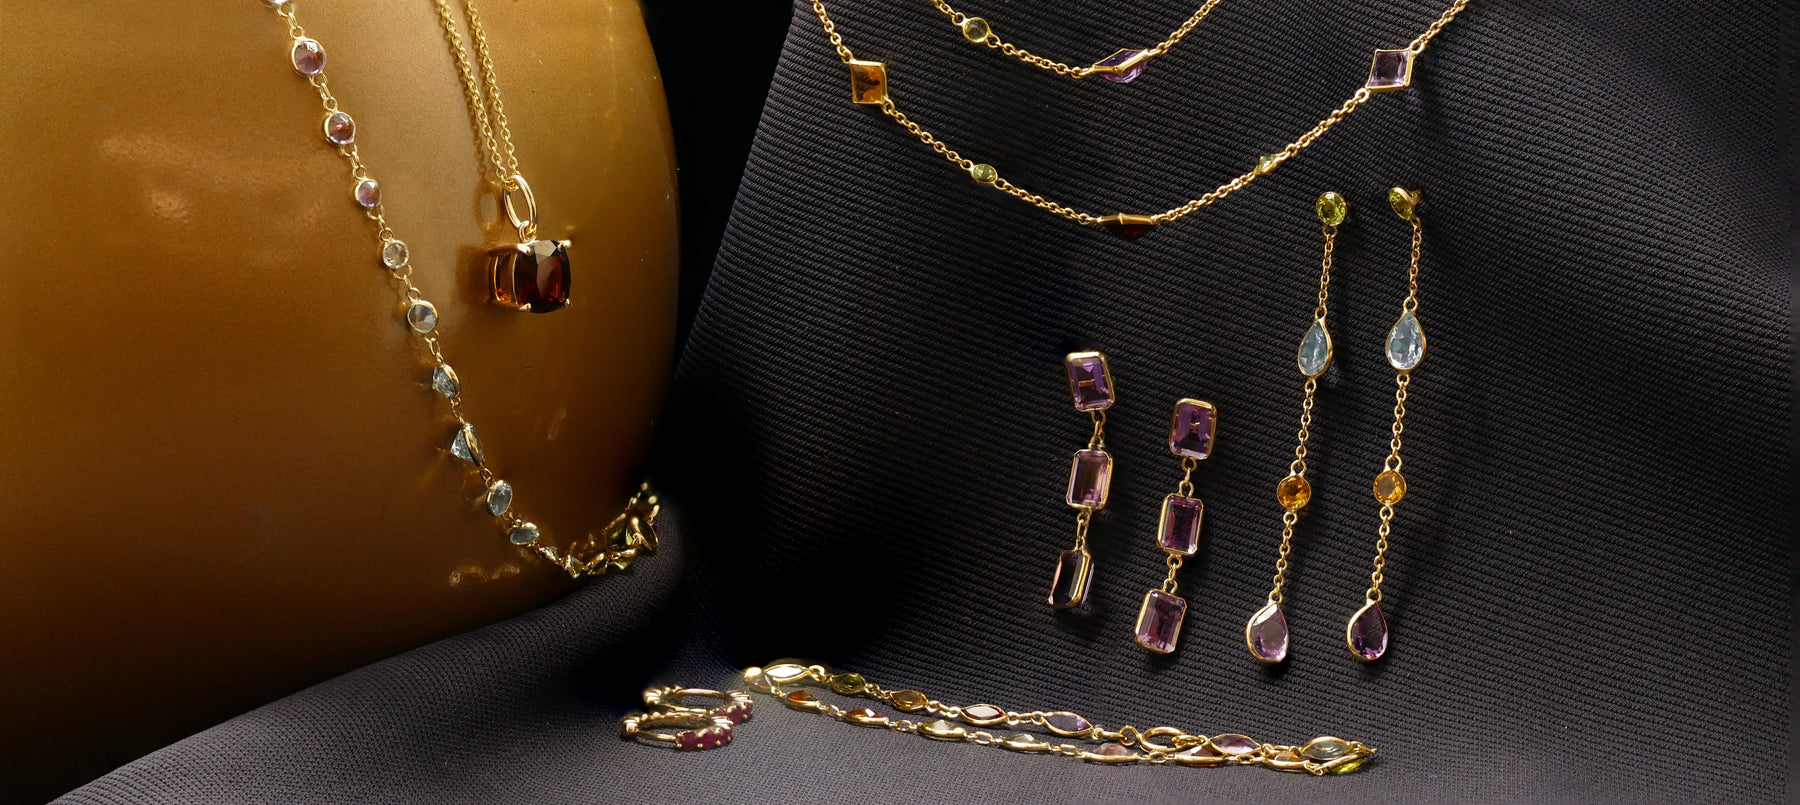 coloured gemstone necklaces, earrings, pendants, rings and bracelets crafted in gold or luscious platinum. 